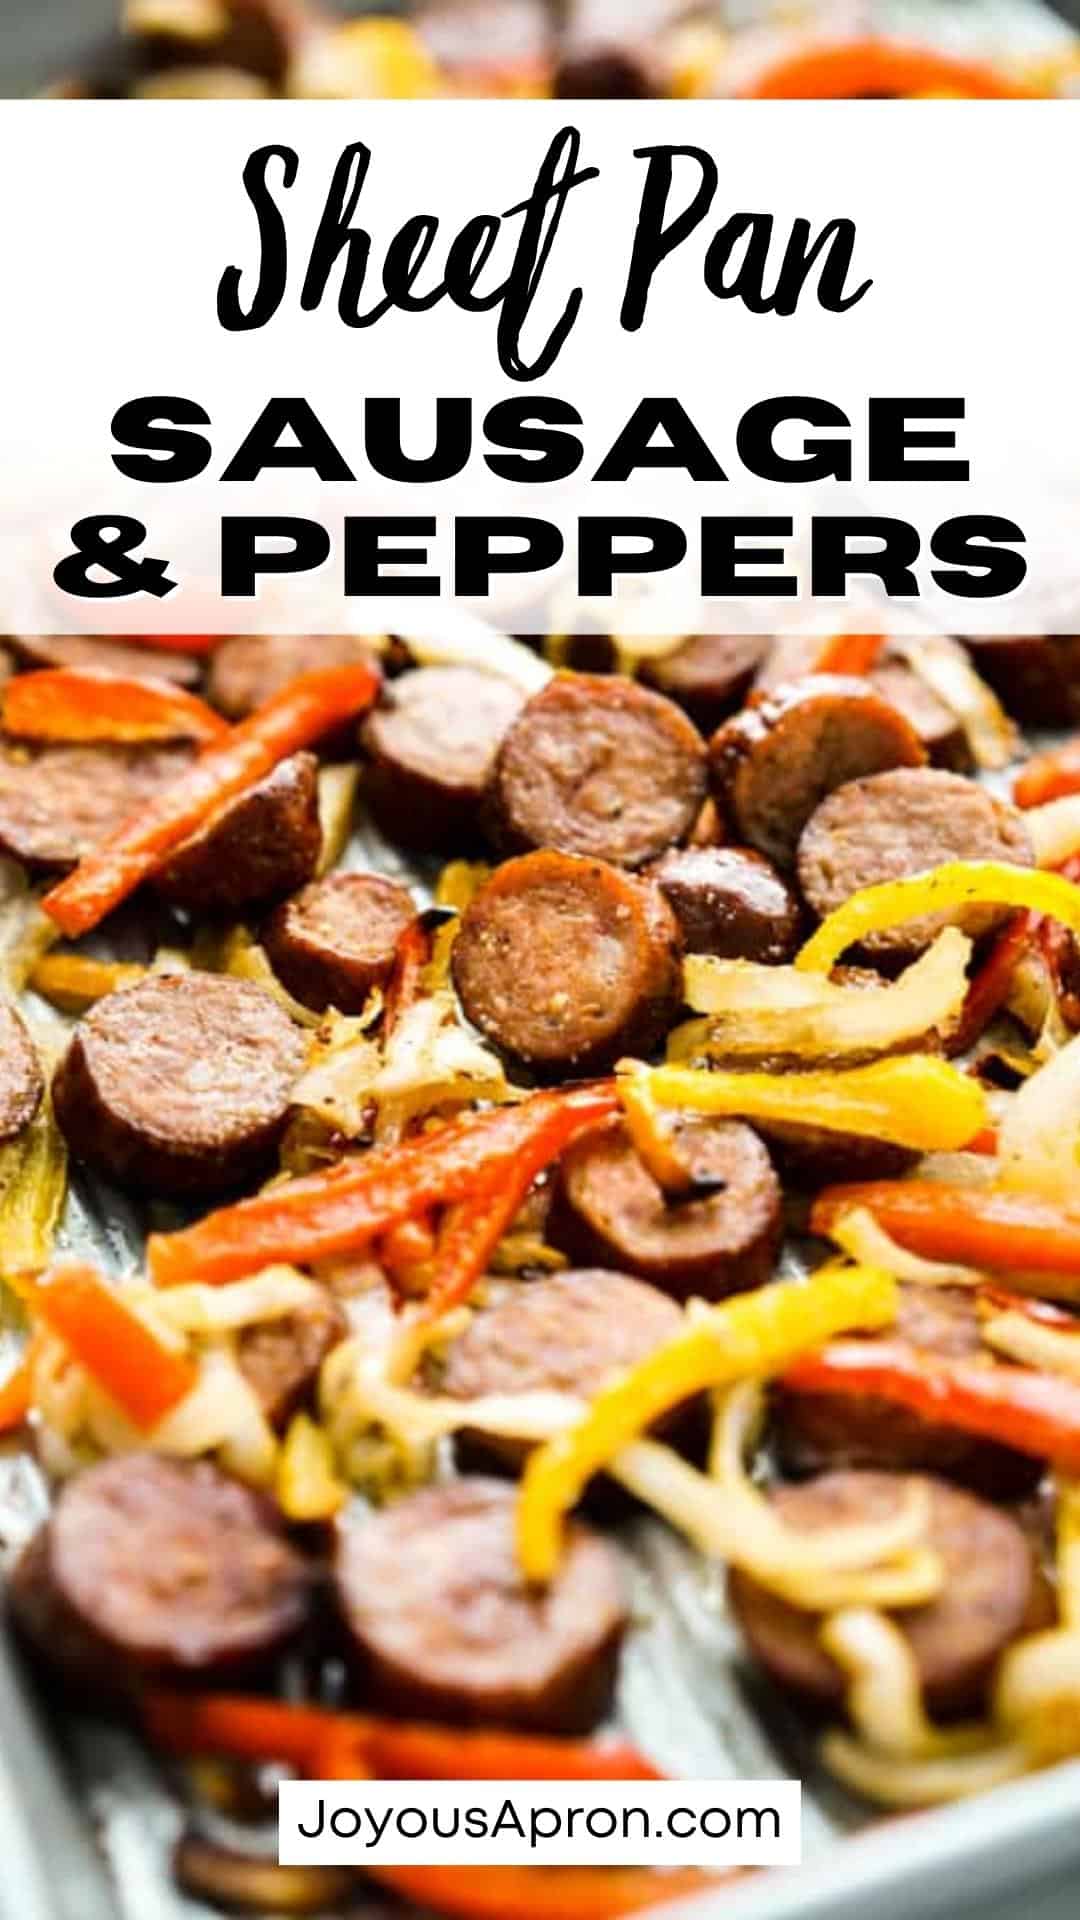 Sheet Pan Oven Baked Sausage and Peppers - Easy weeknight dinner ready under 30 minutes! Low carb, quick and yummy! Sausage, peppers and onions baked in the oven on just one pan. Easy cleanup! via @joyousapron